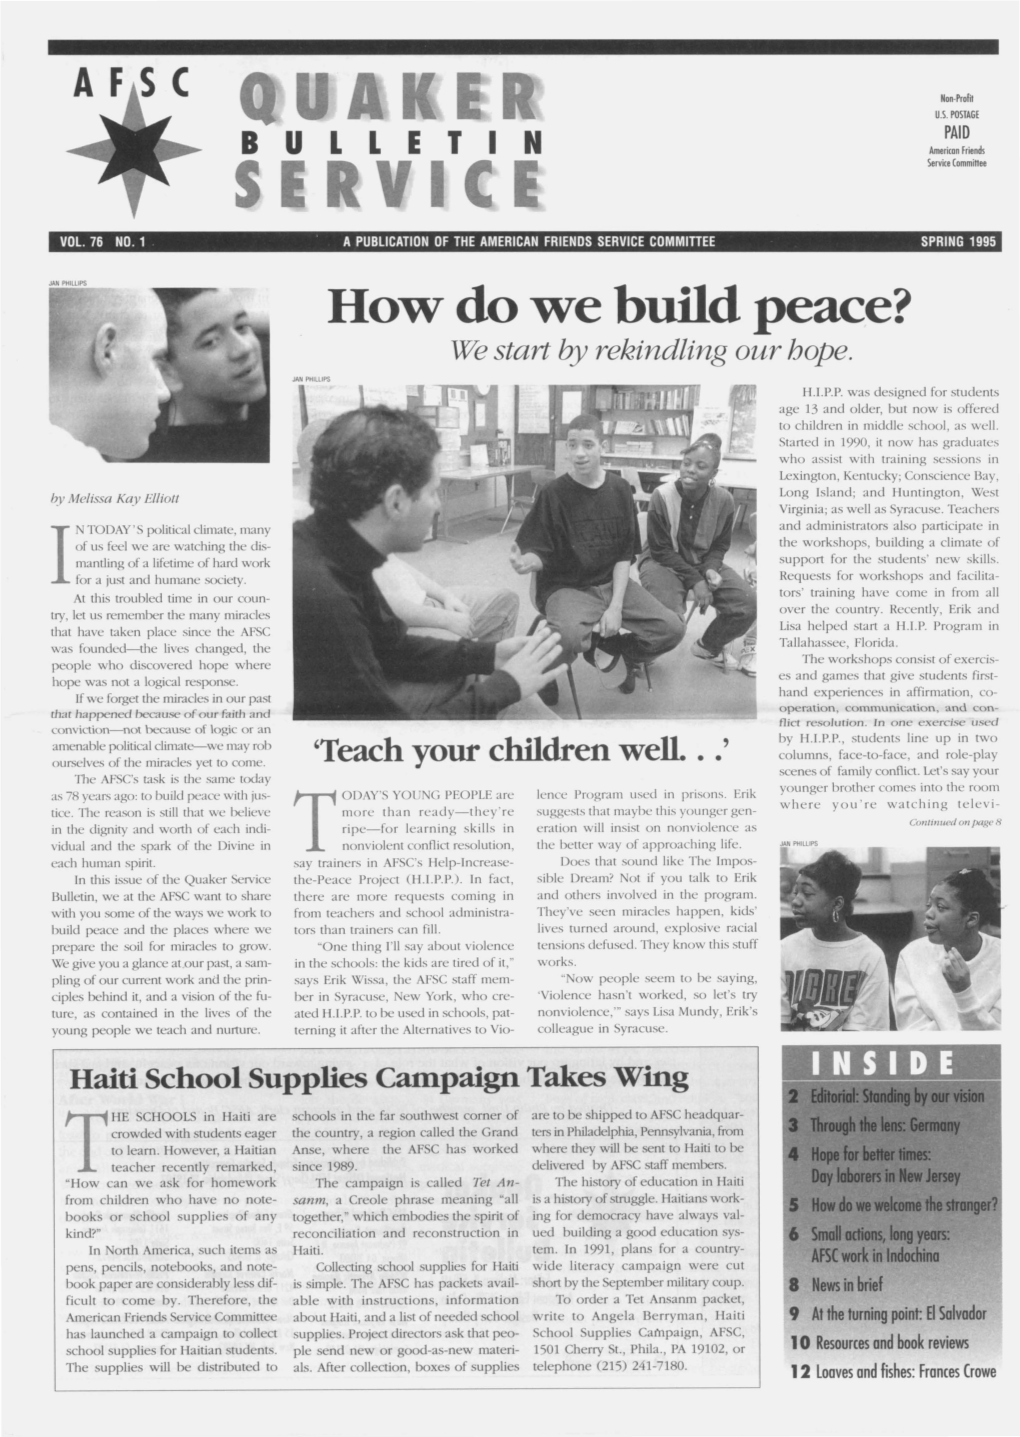 SPRING 1995 JAN PHILLIPS How Do We Build Peace? We Start by Rekindling Our Hope